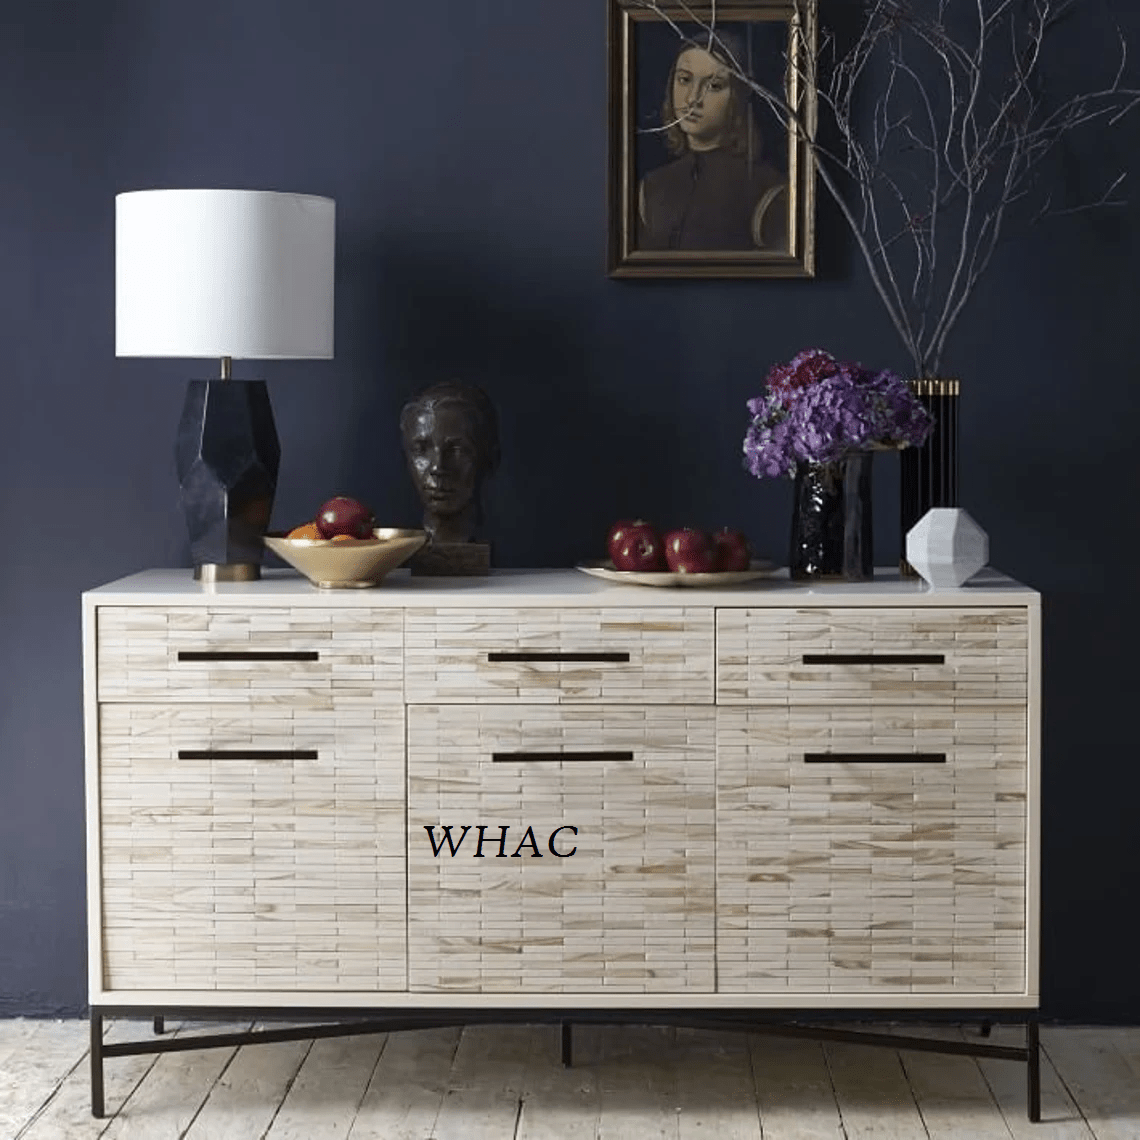 Handmade Tiled Buffet Sideboard with Metal Base | Bone Inlay Sideboard Buffet & Sideboard - Bone Inlay Furnitures